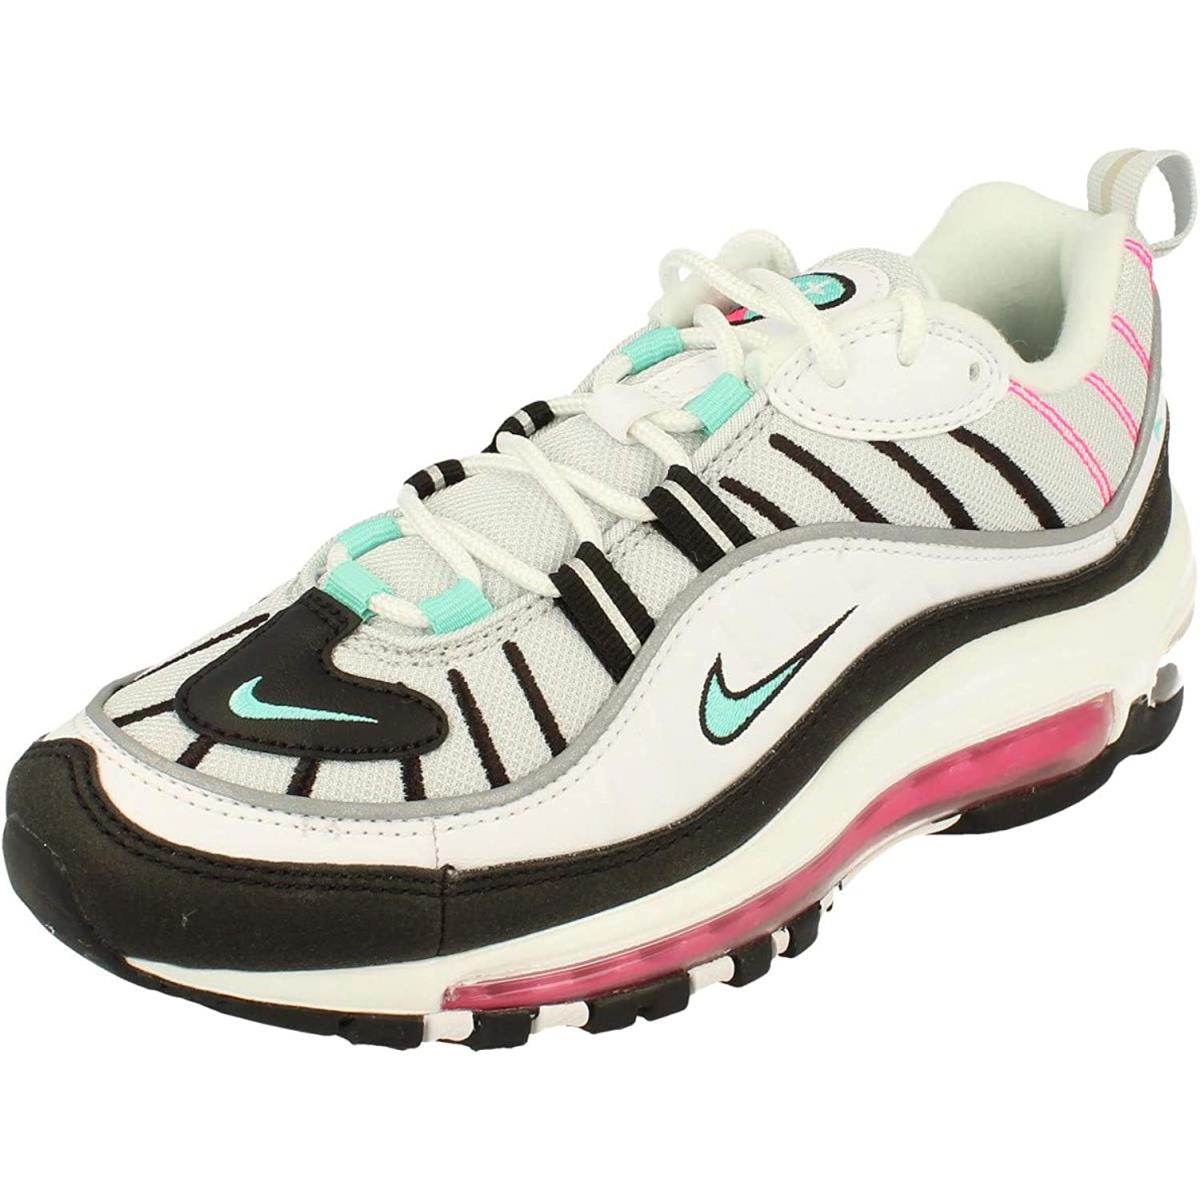 Nike Air Max 98 Black/white/gold Women`s Running Shoes Sneakers 8.5